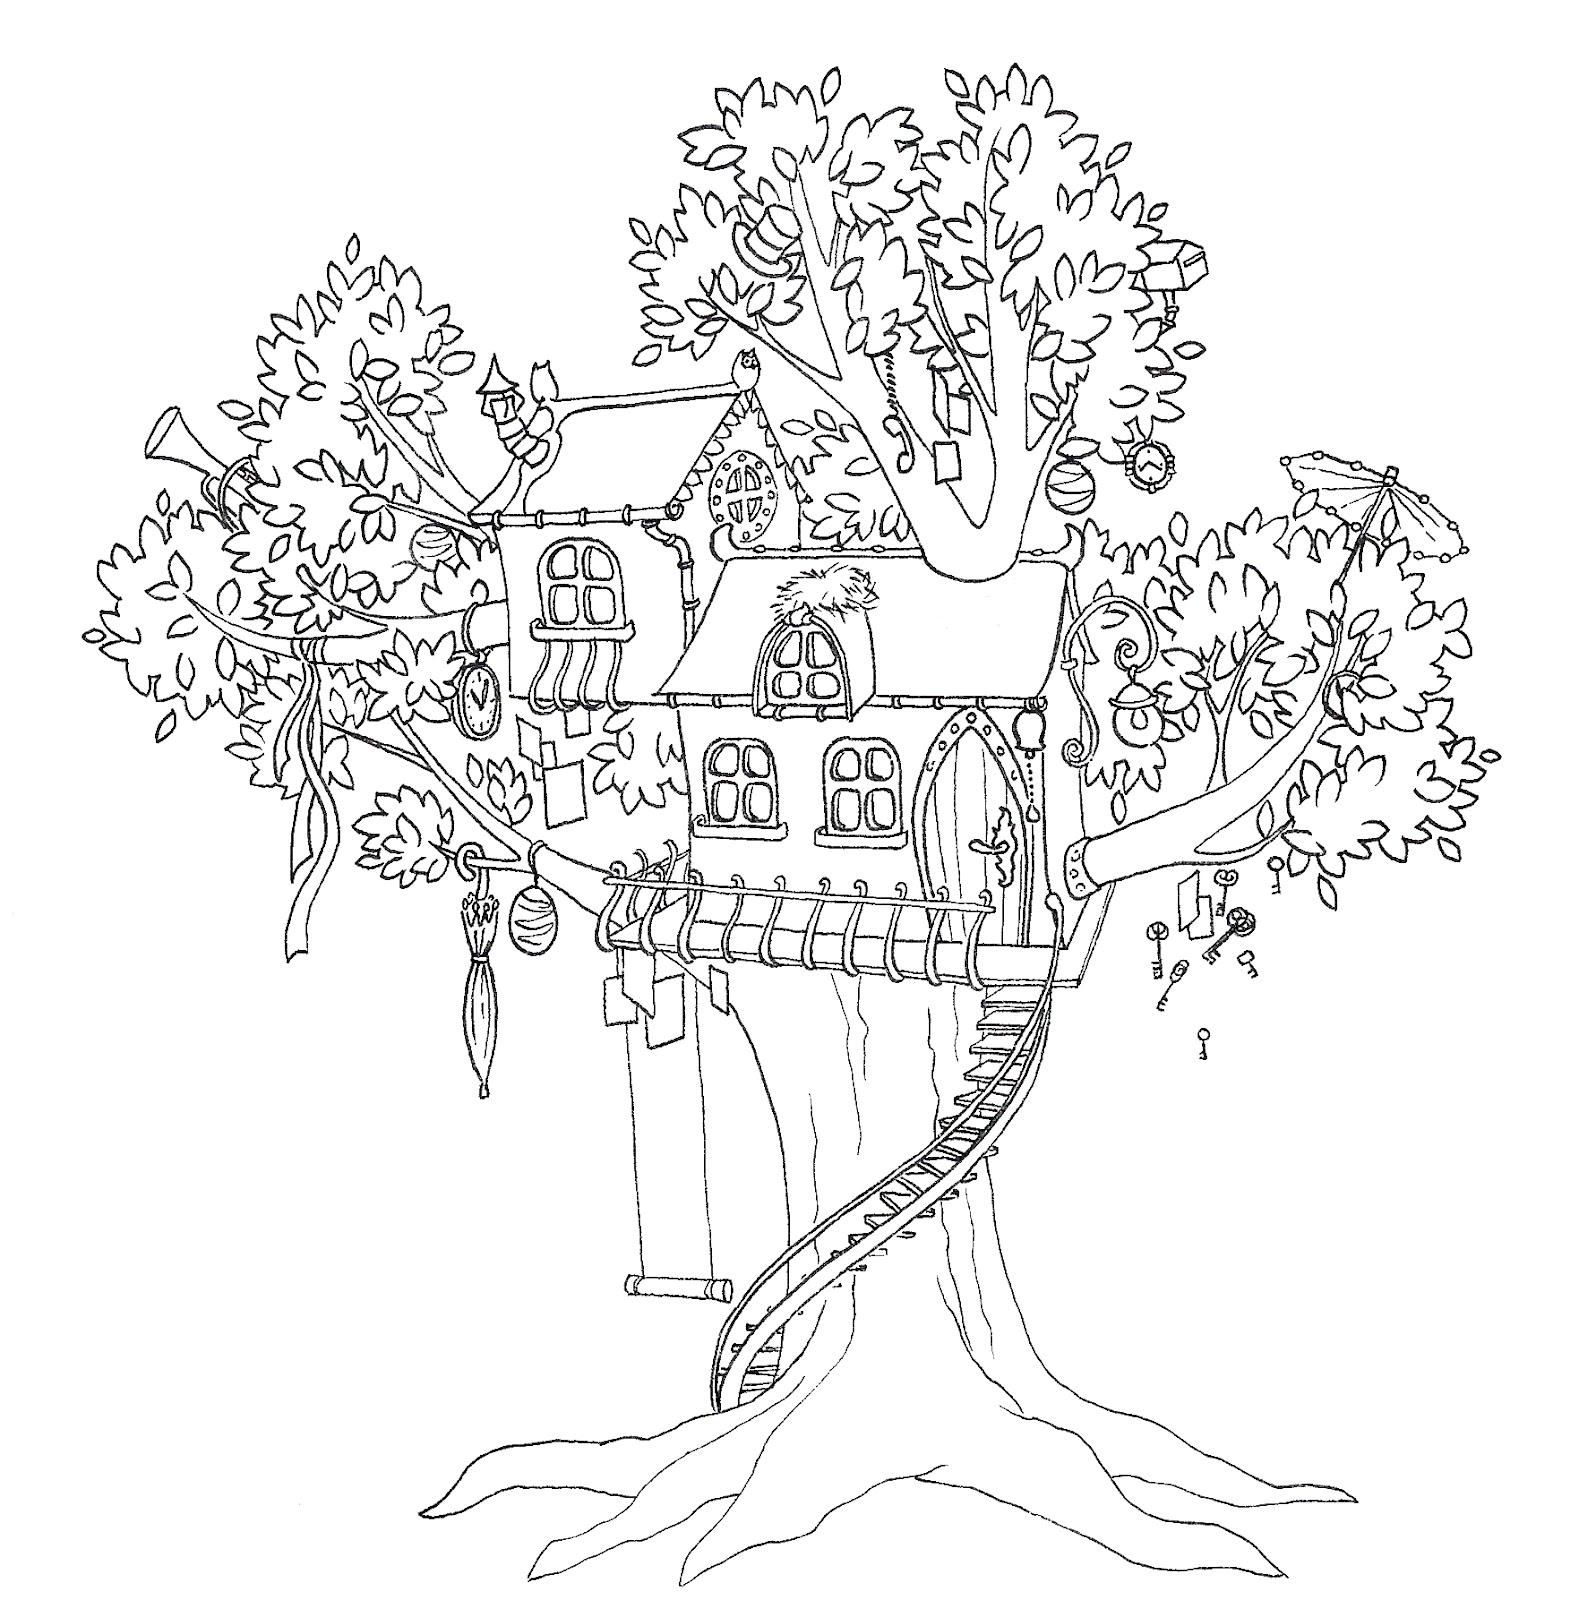 Drawing Tree House #66002 (Buildings and Architecture) – Printable